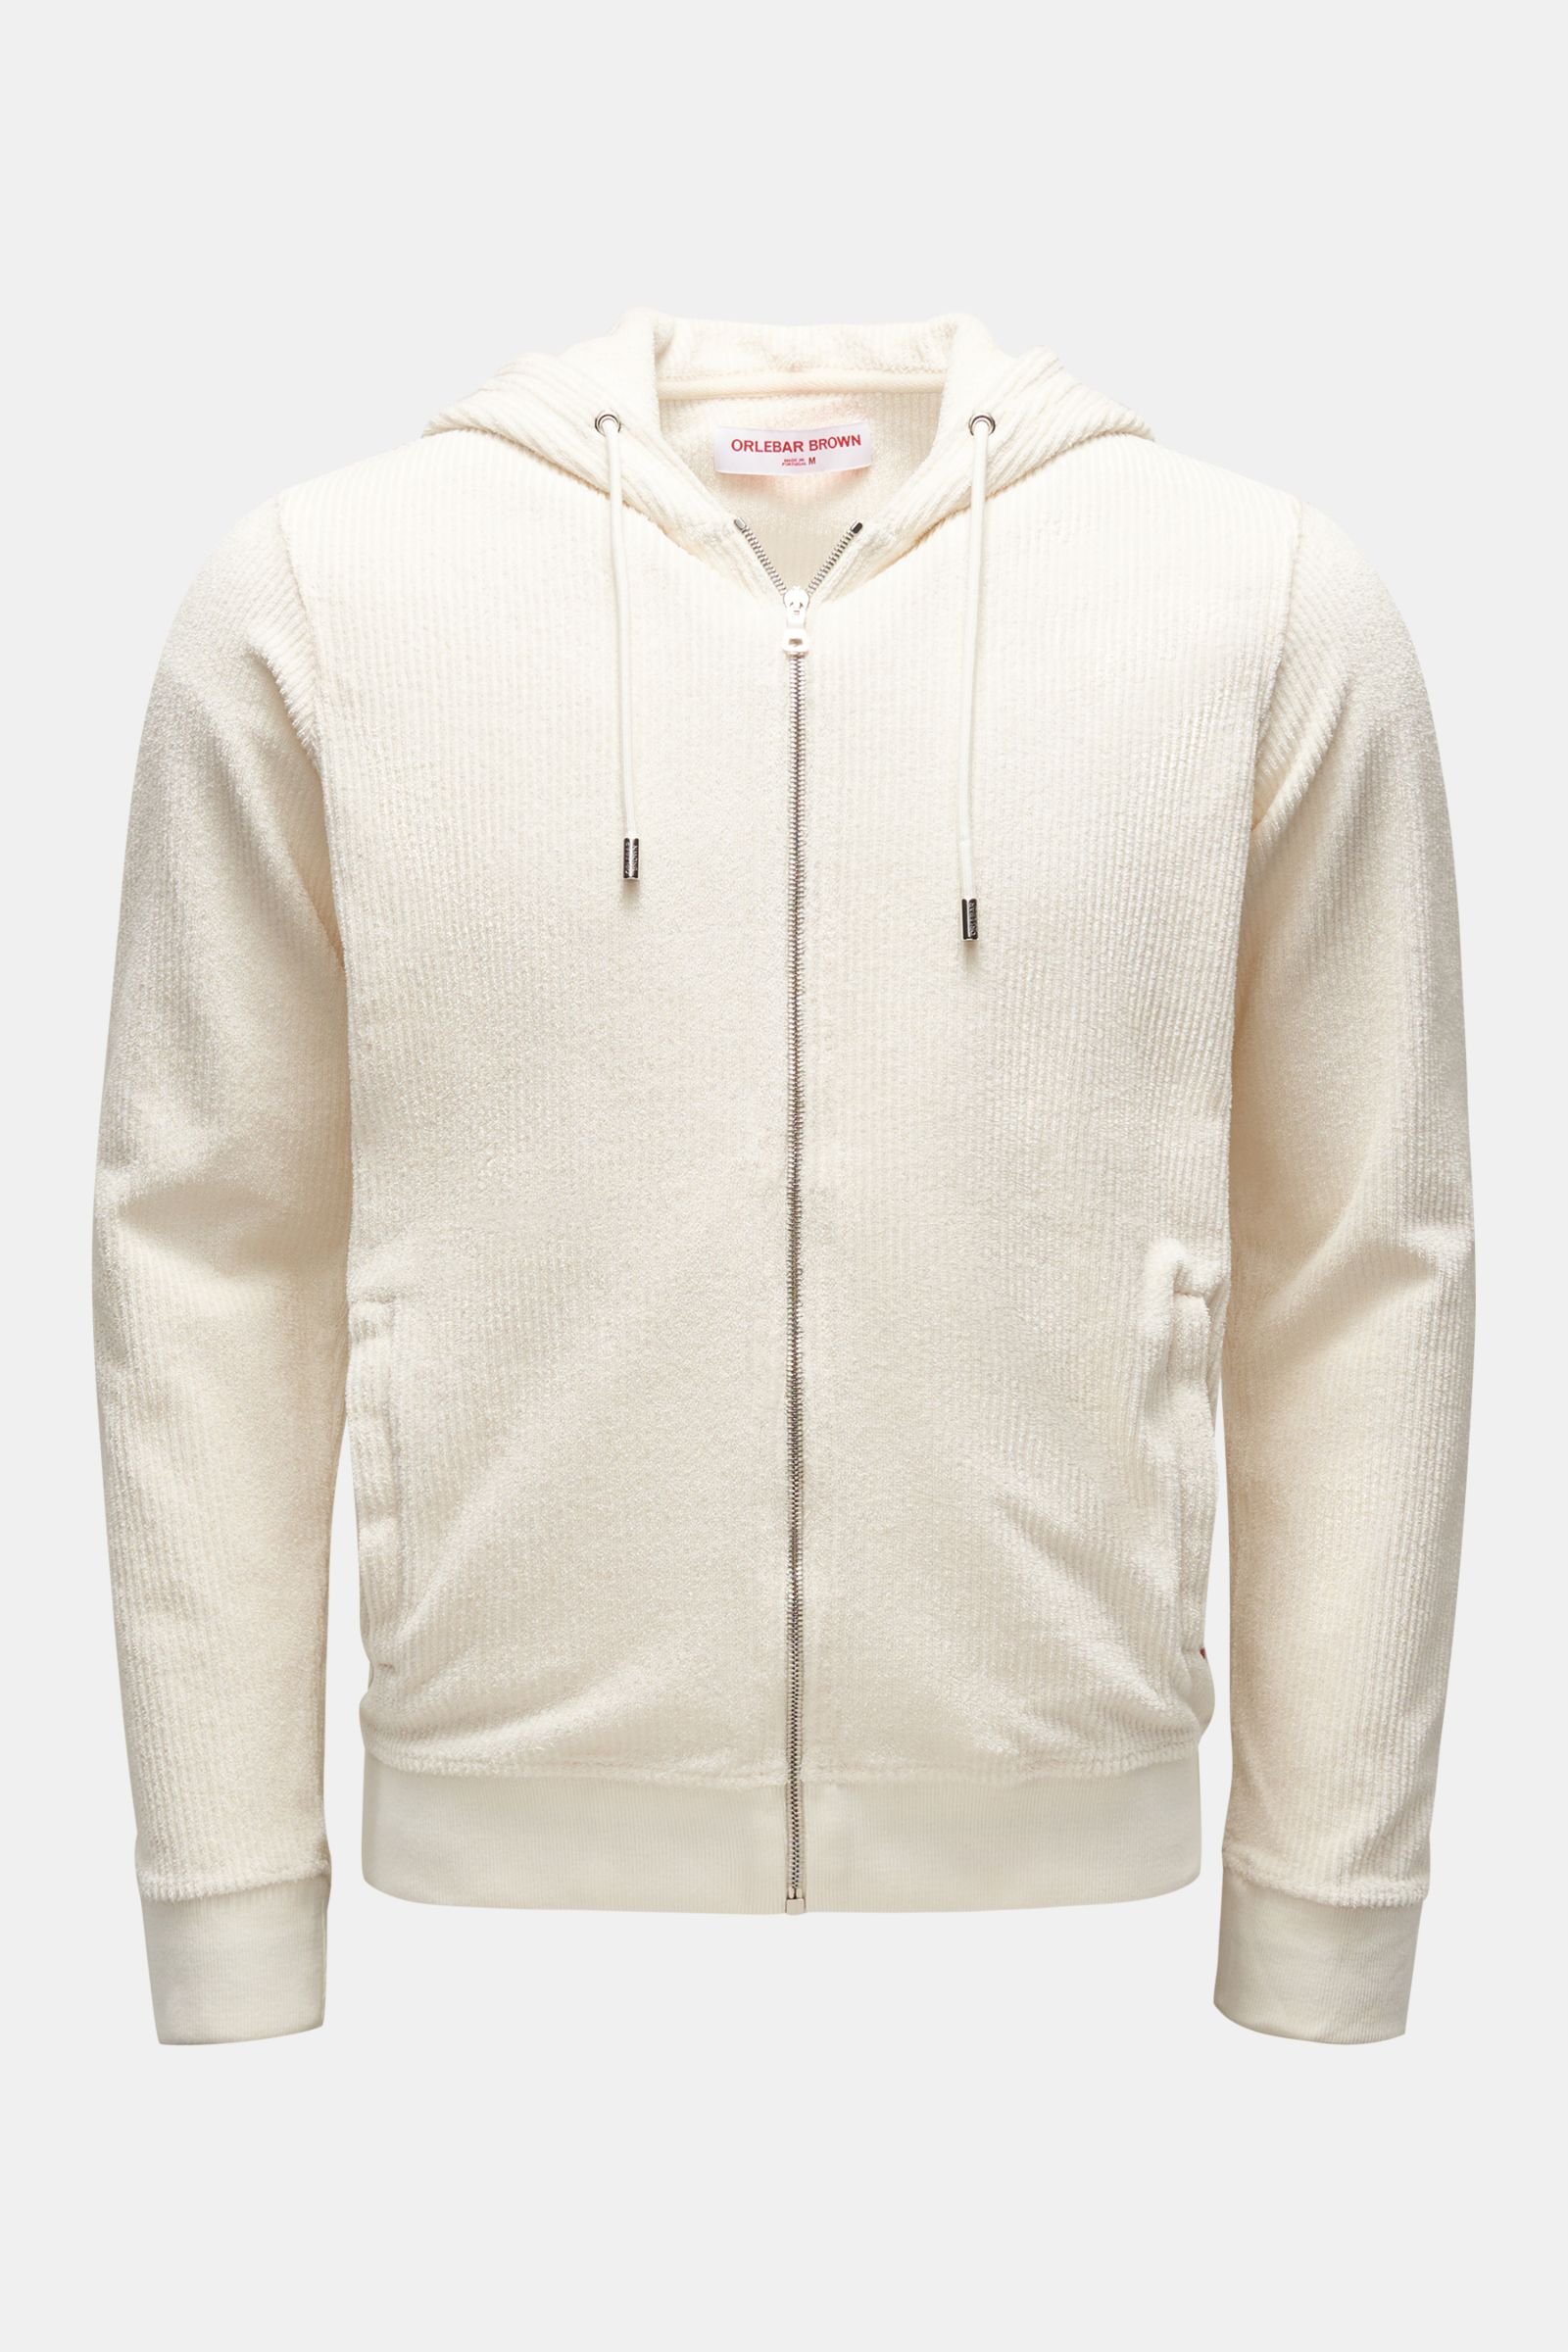 Terry sweat jacket 'Mathers DN Towelling' cream